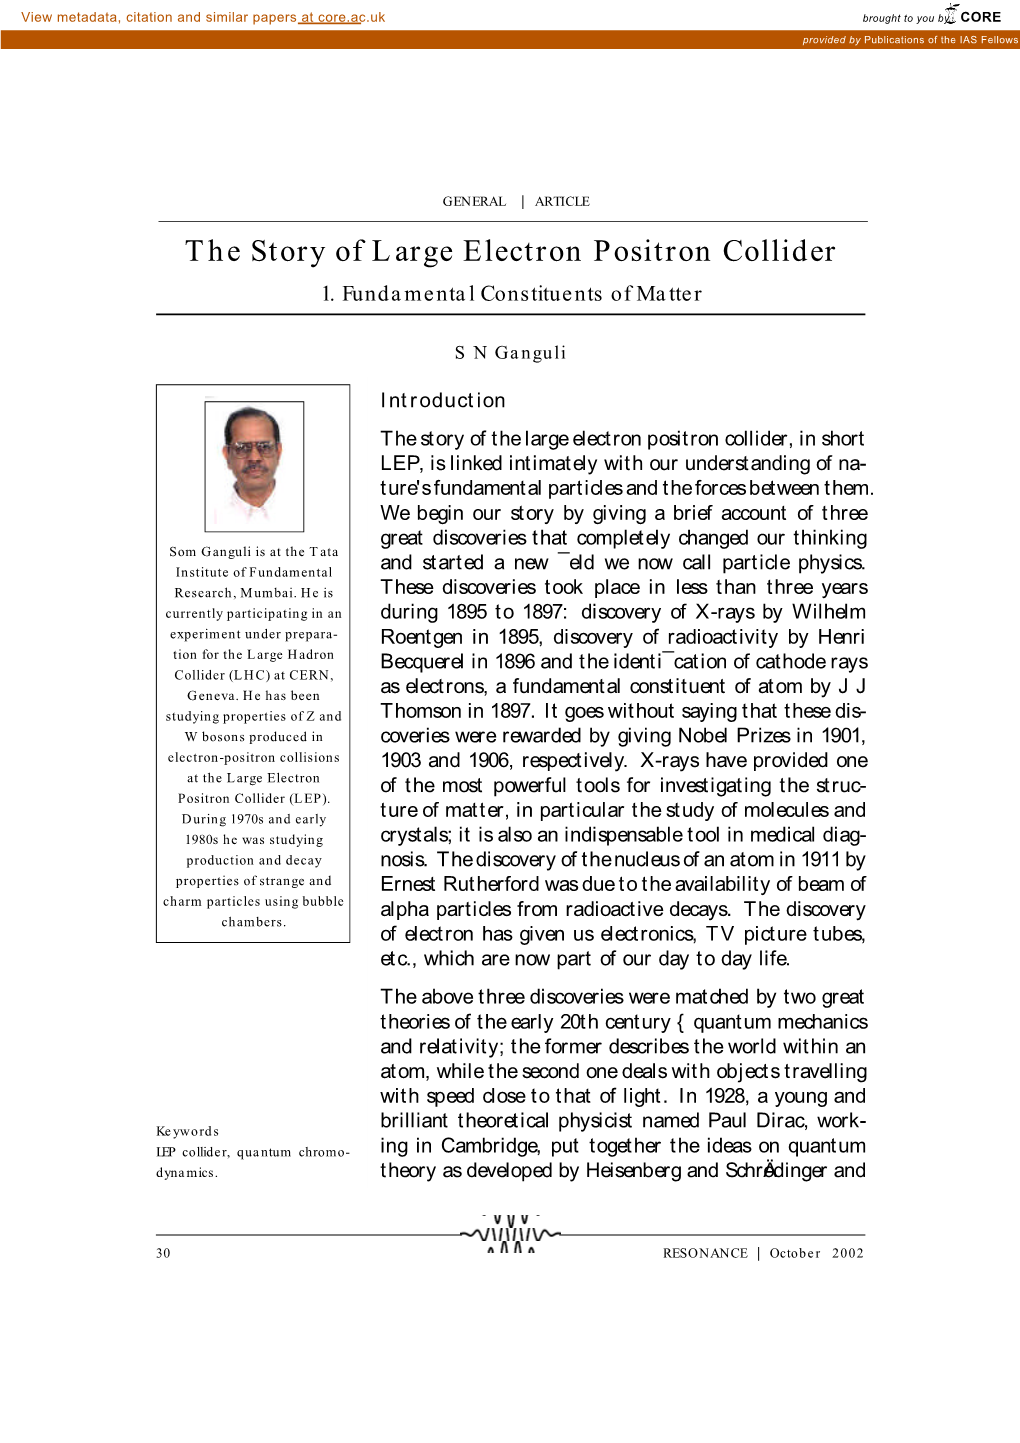 The Story of Large Electron Positron Collider 1